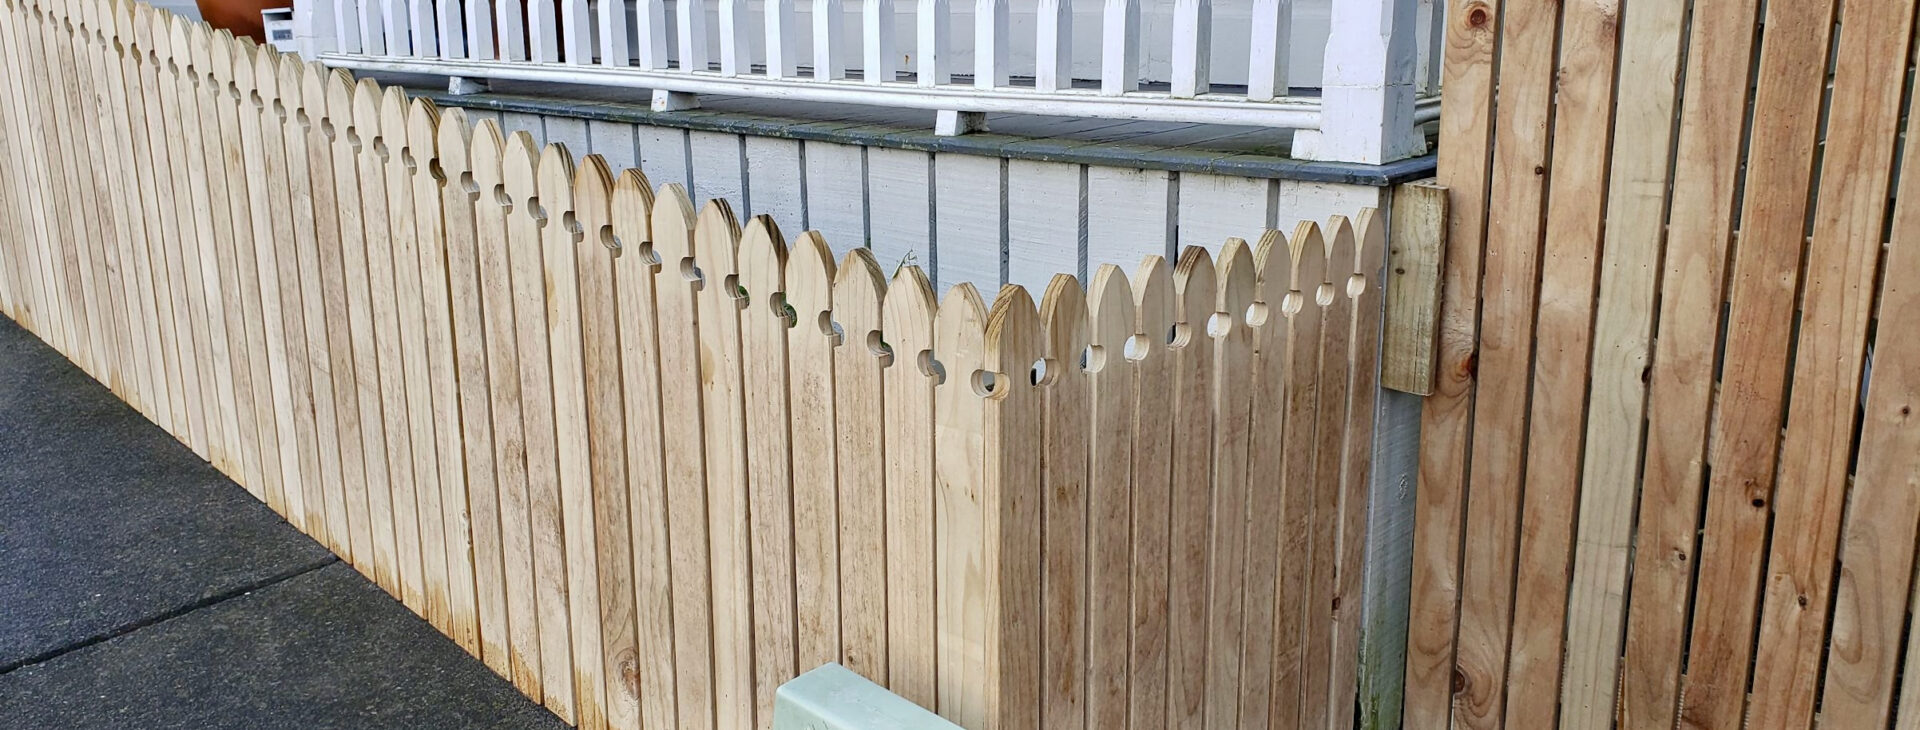 Decking, fencing and woodwork